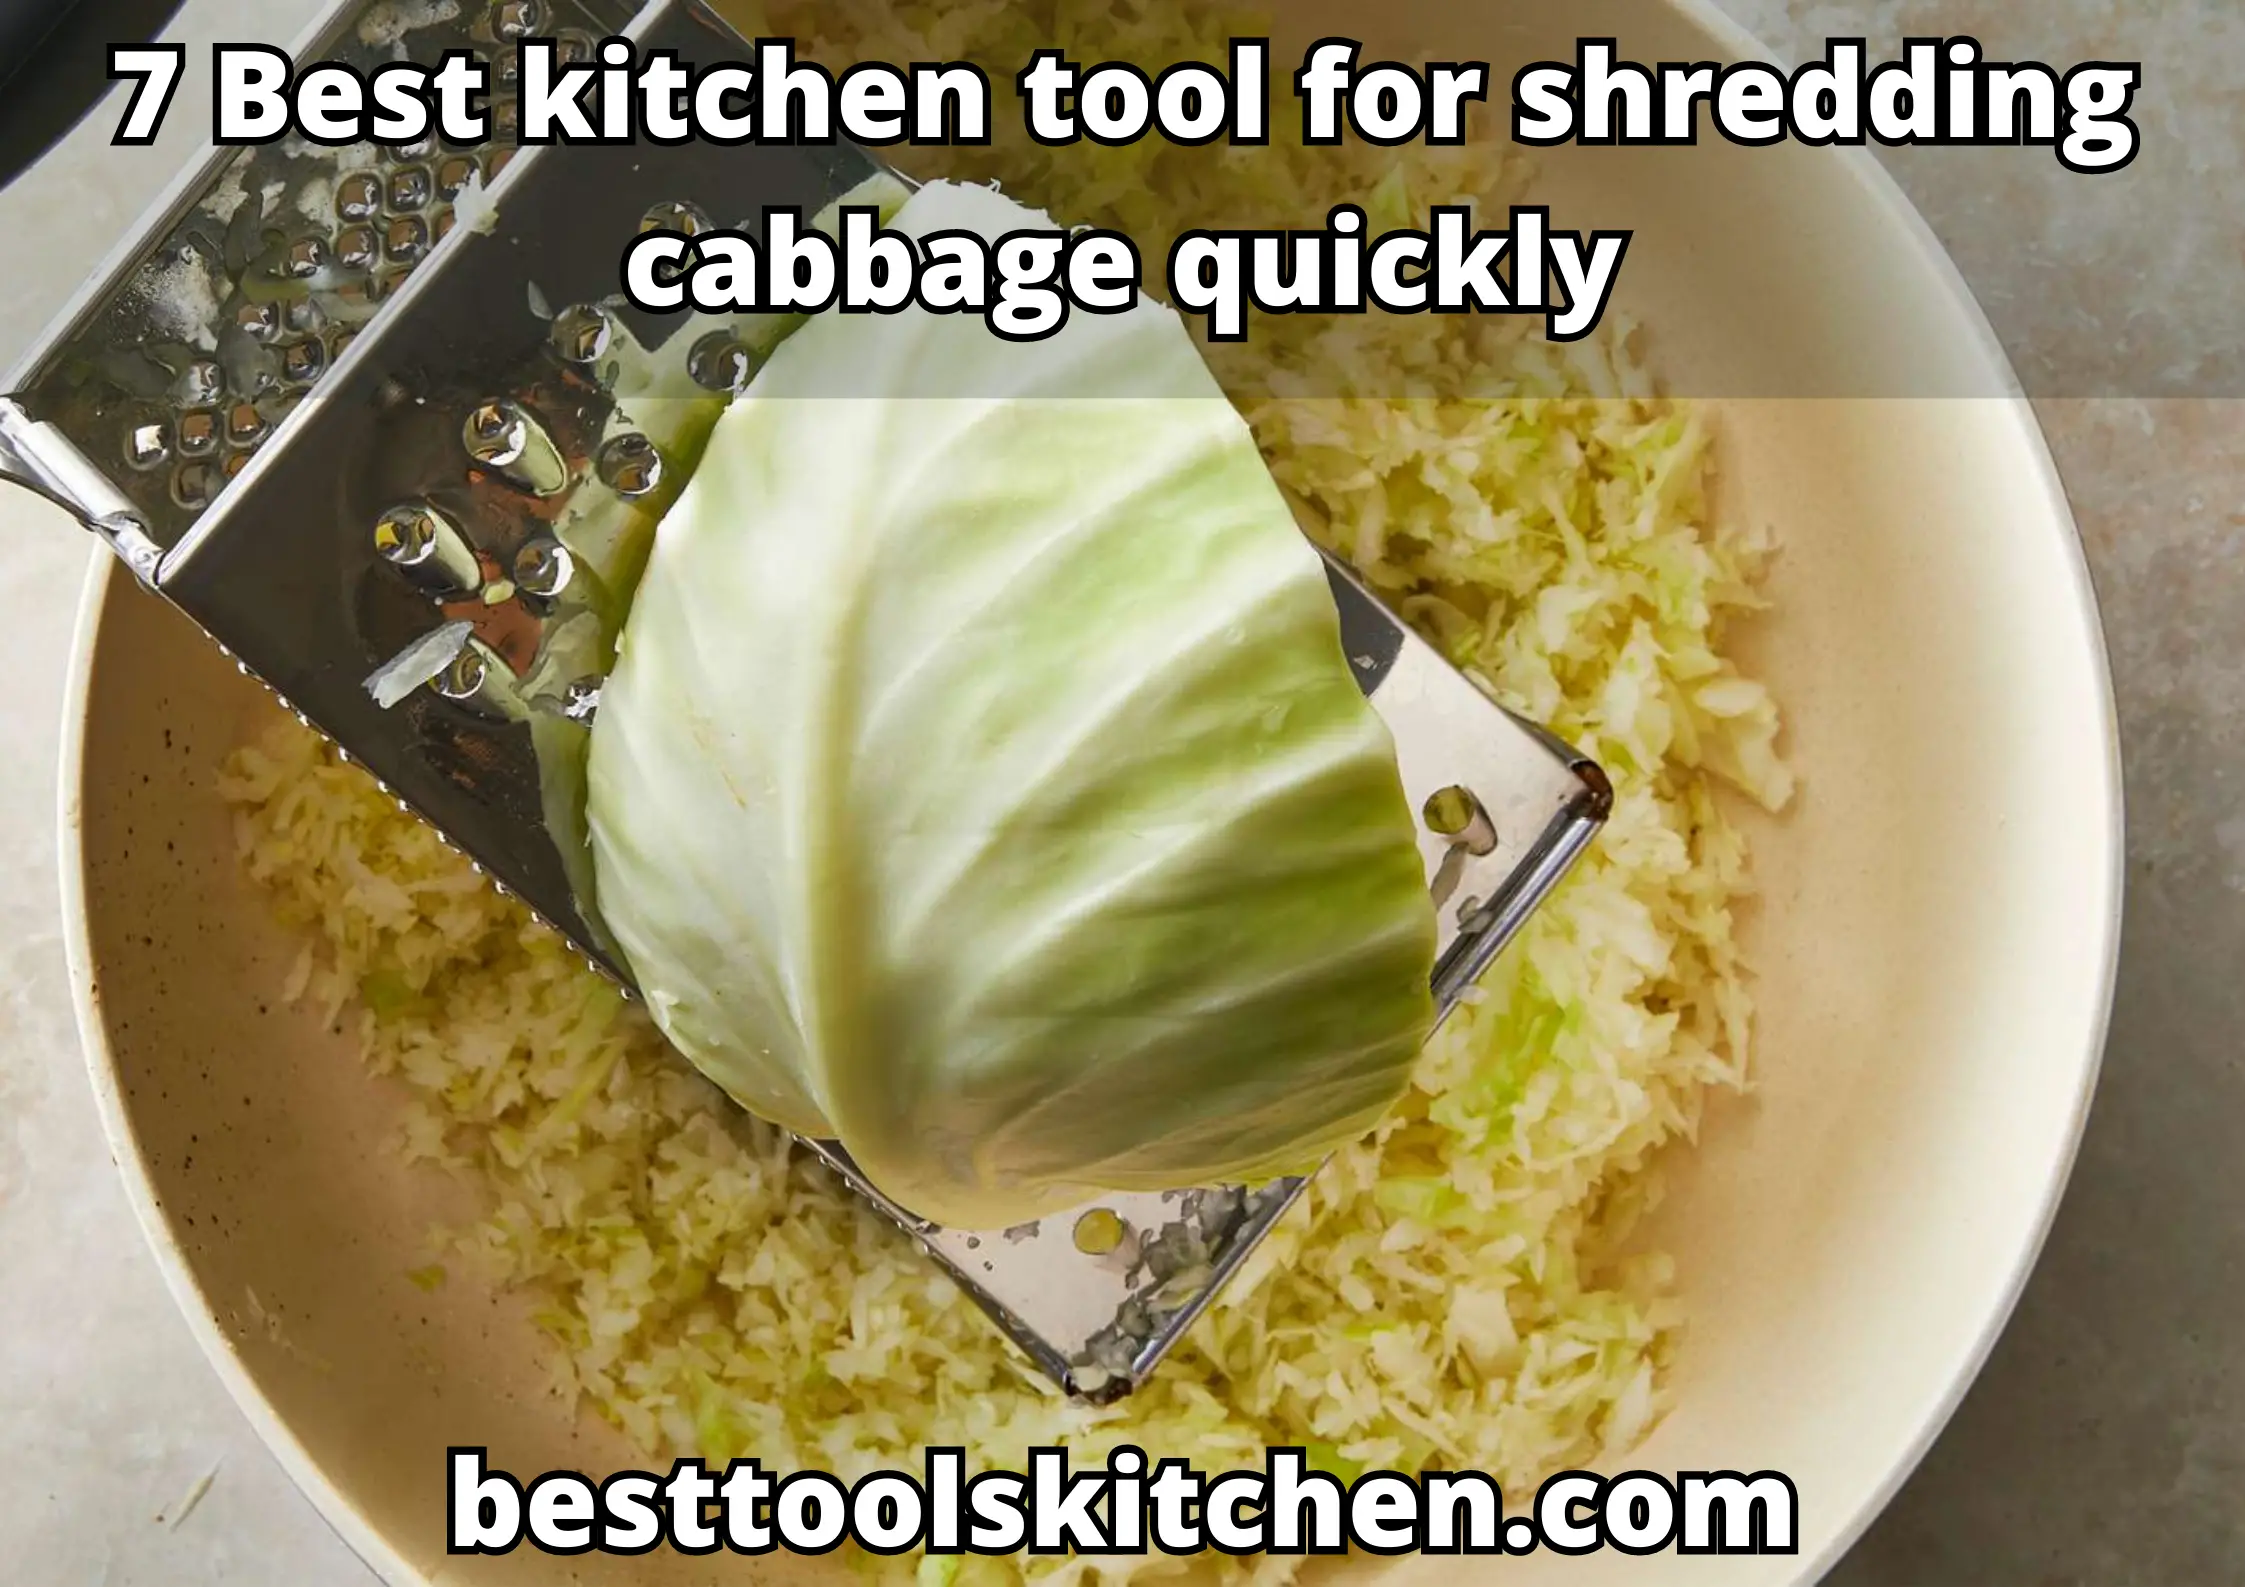 7 Best kitchen tool for shredding cabbage quickly